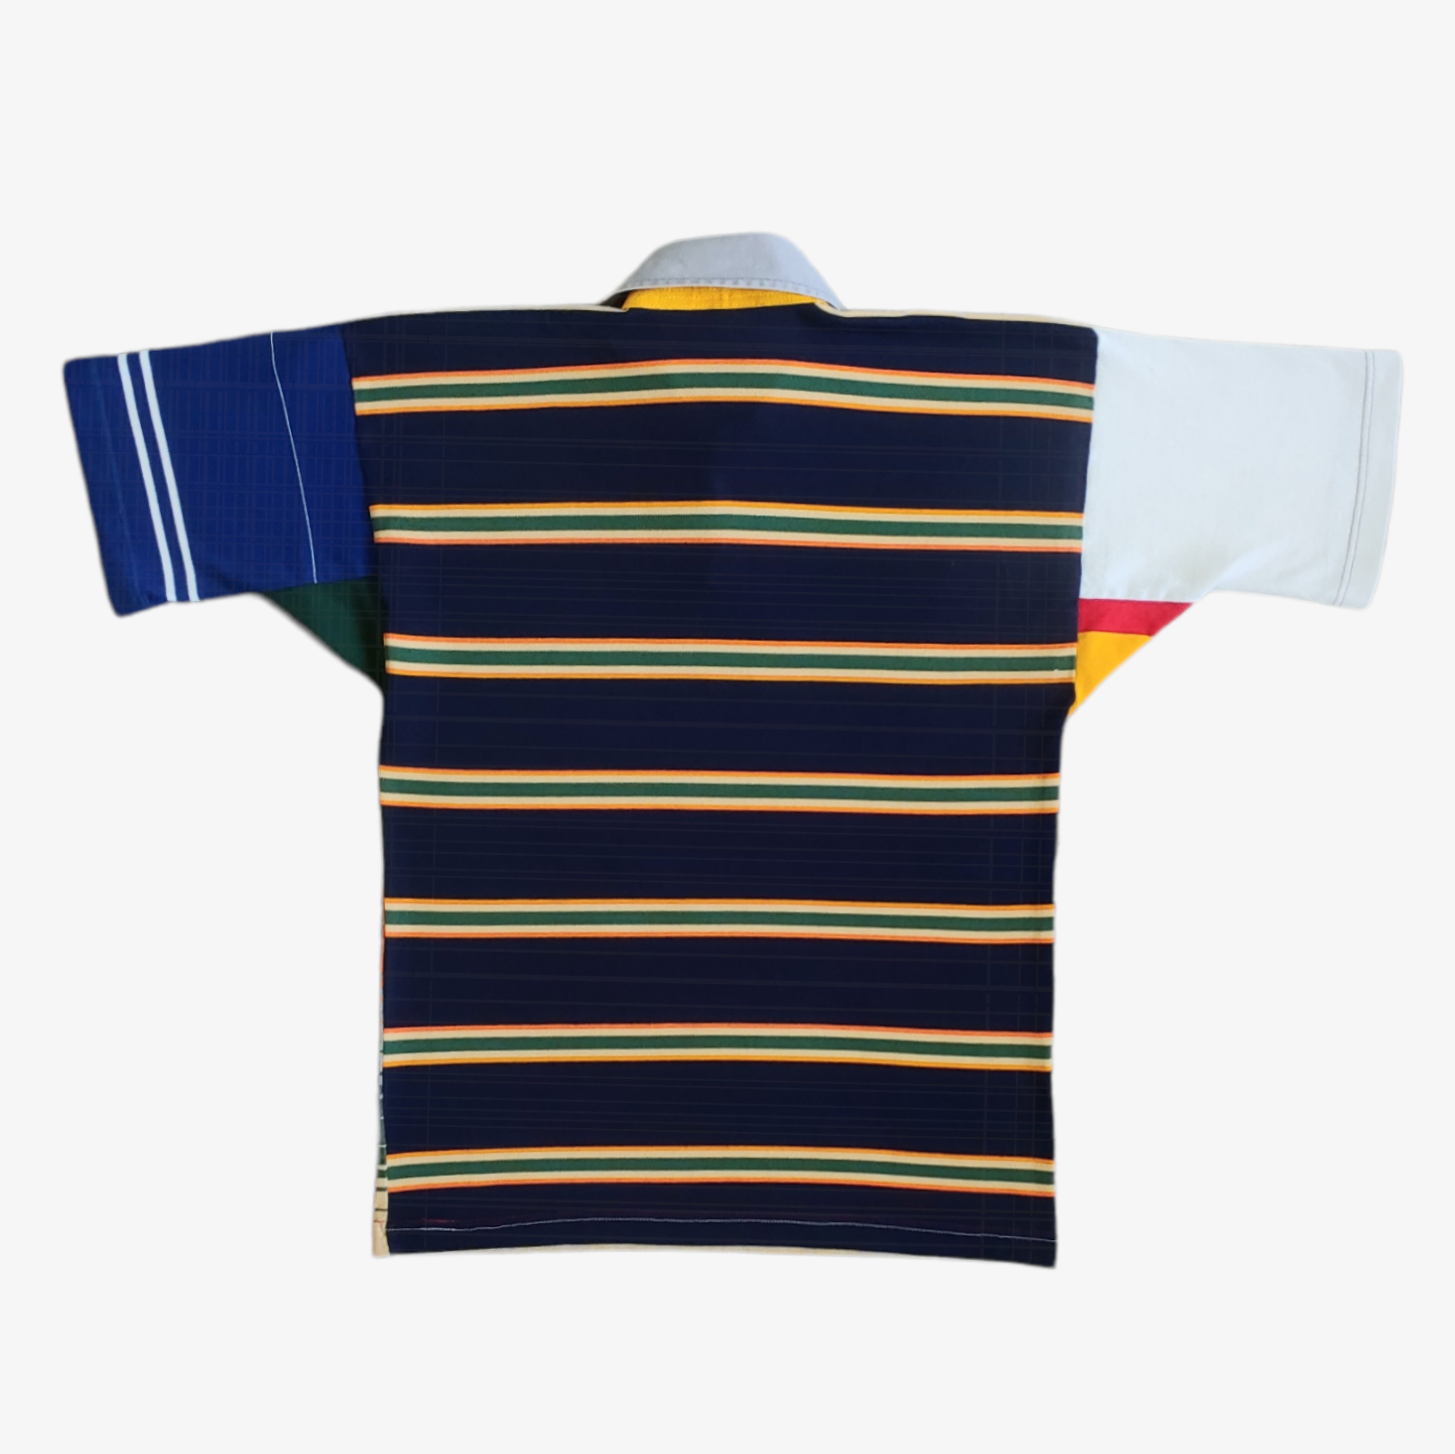 Vintage 90s Canterbury Striped Rugby Jersey Back - Casspios Dream